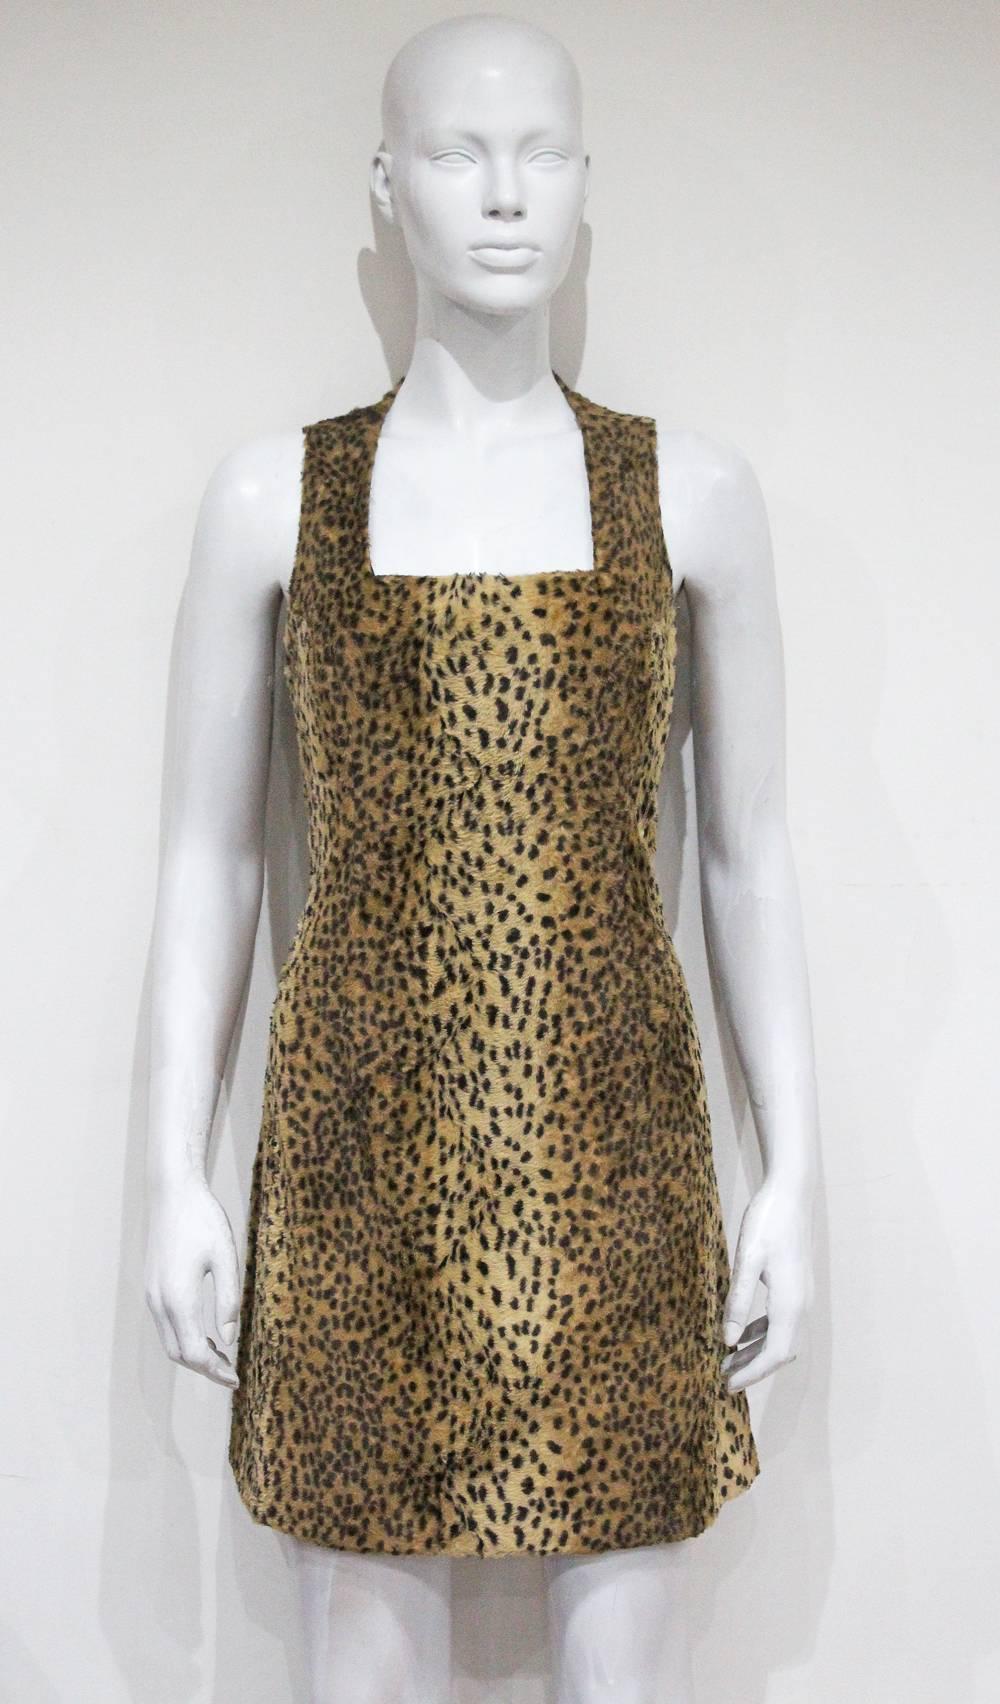 Gianni Versace cheetah print faux fur jacket and dress ensemble, c. 1990s  In Excellent Condition For Sale In London, GB